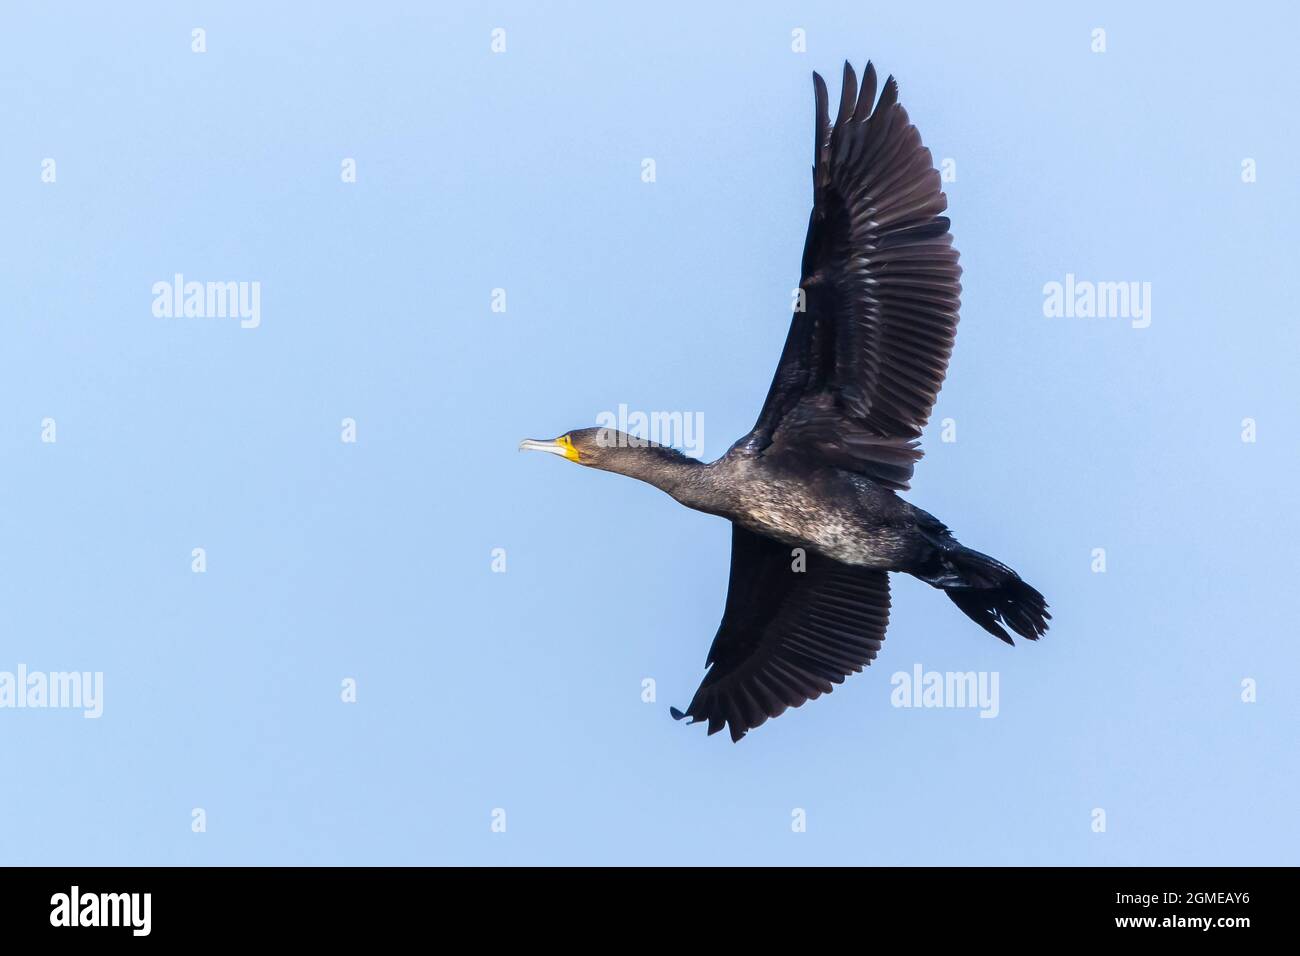 Great Black Cormorant bird, Phalacrocorax carbo, in flight low above the water surface of a lake during daytime Stock Photo